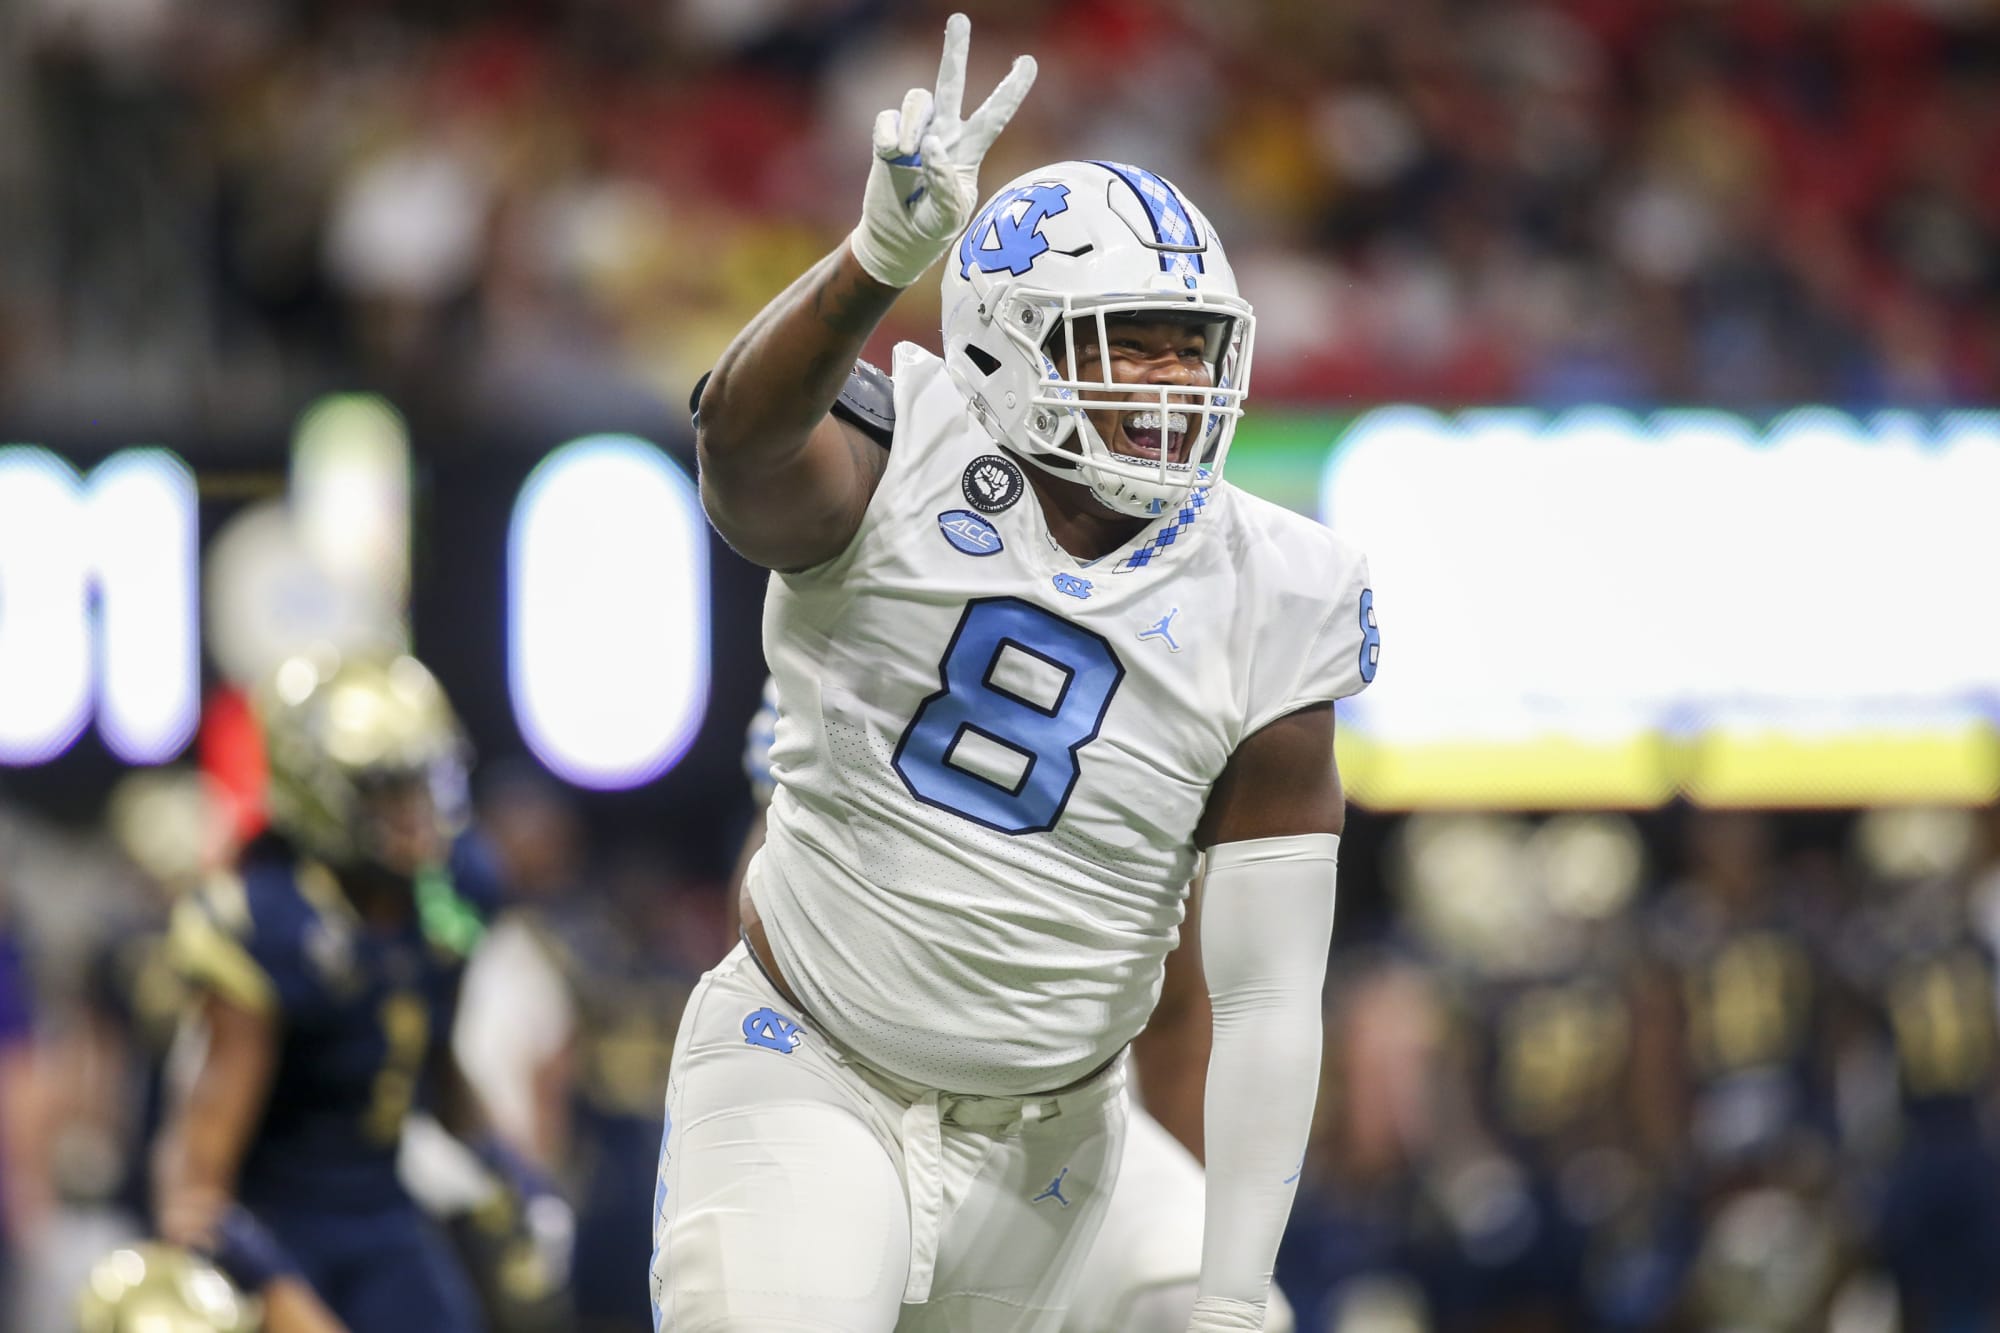 UNC Football: Two Tar Heel WR's named to award watch list